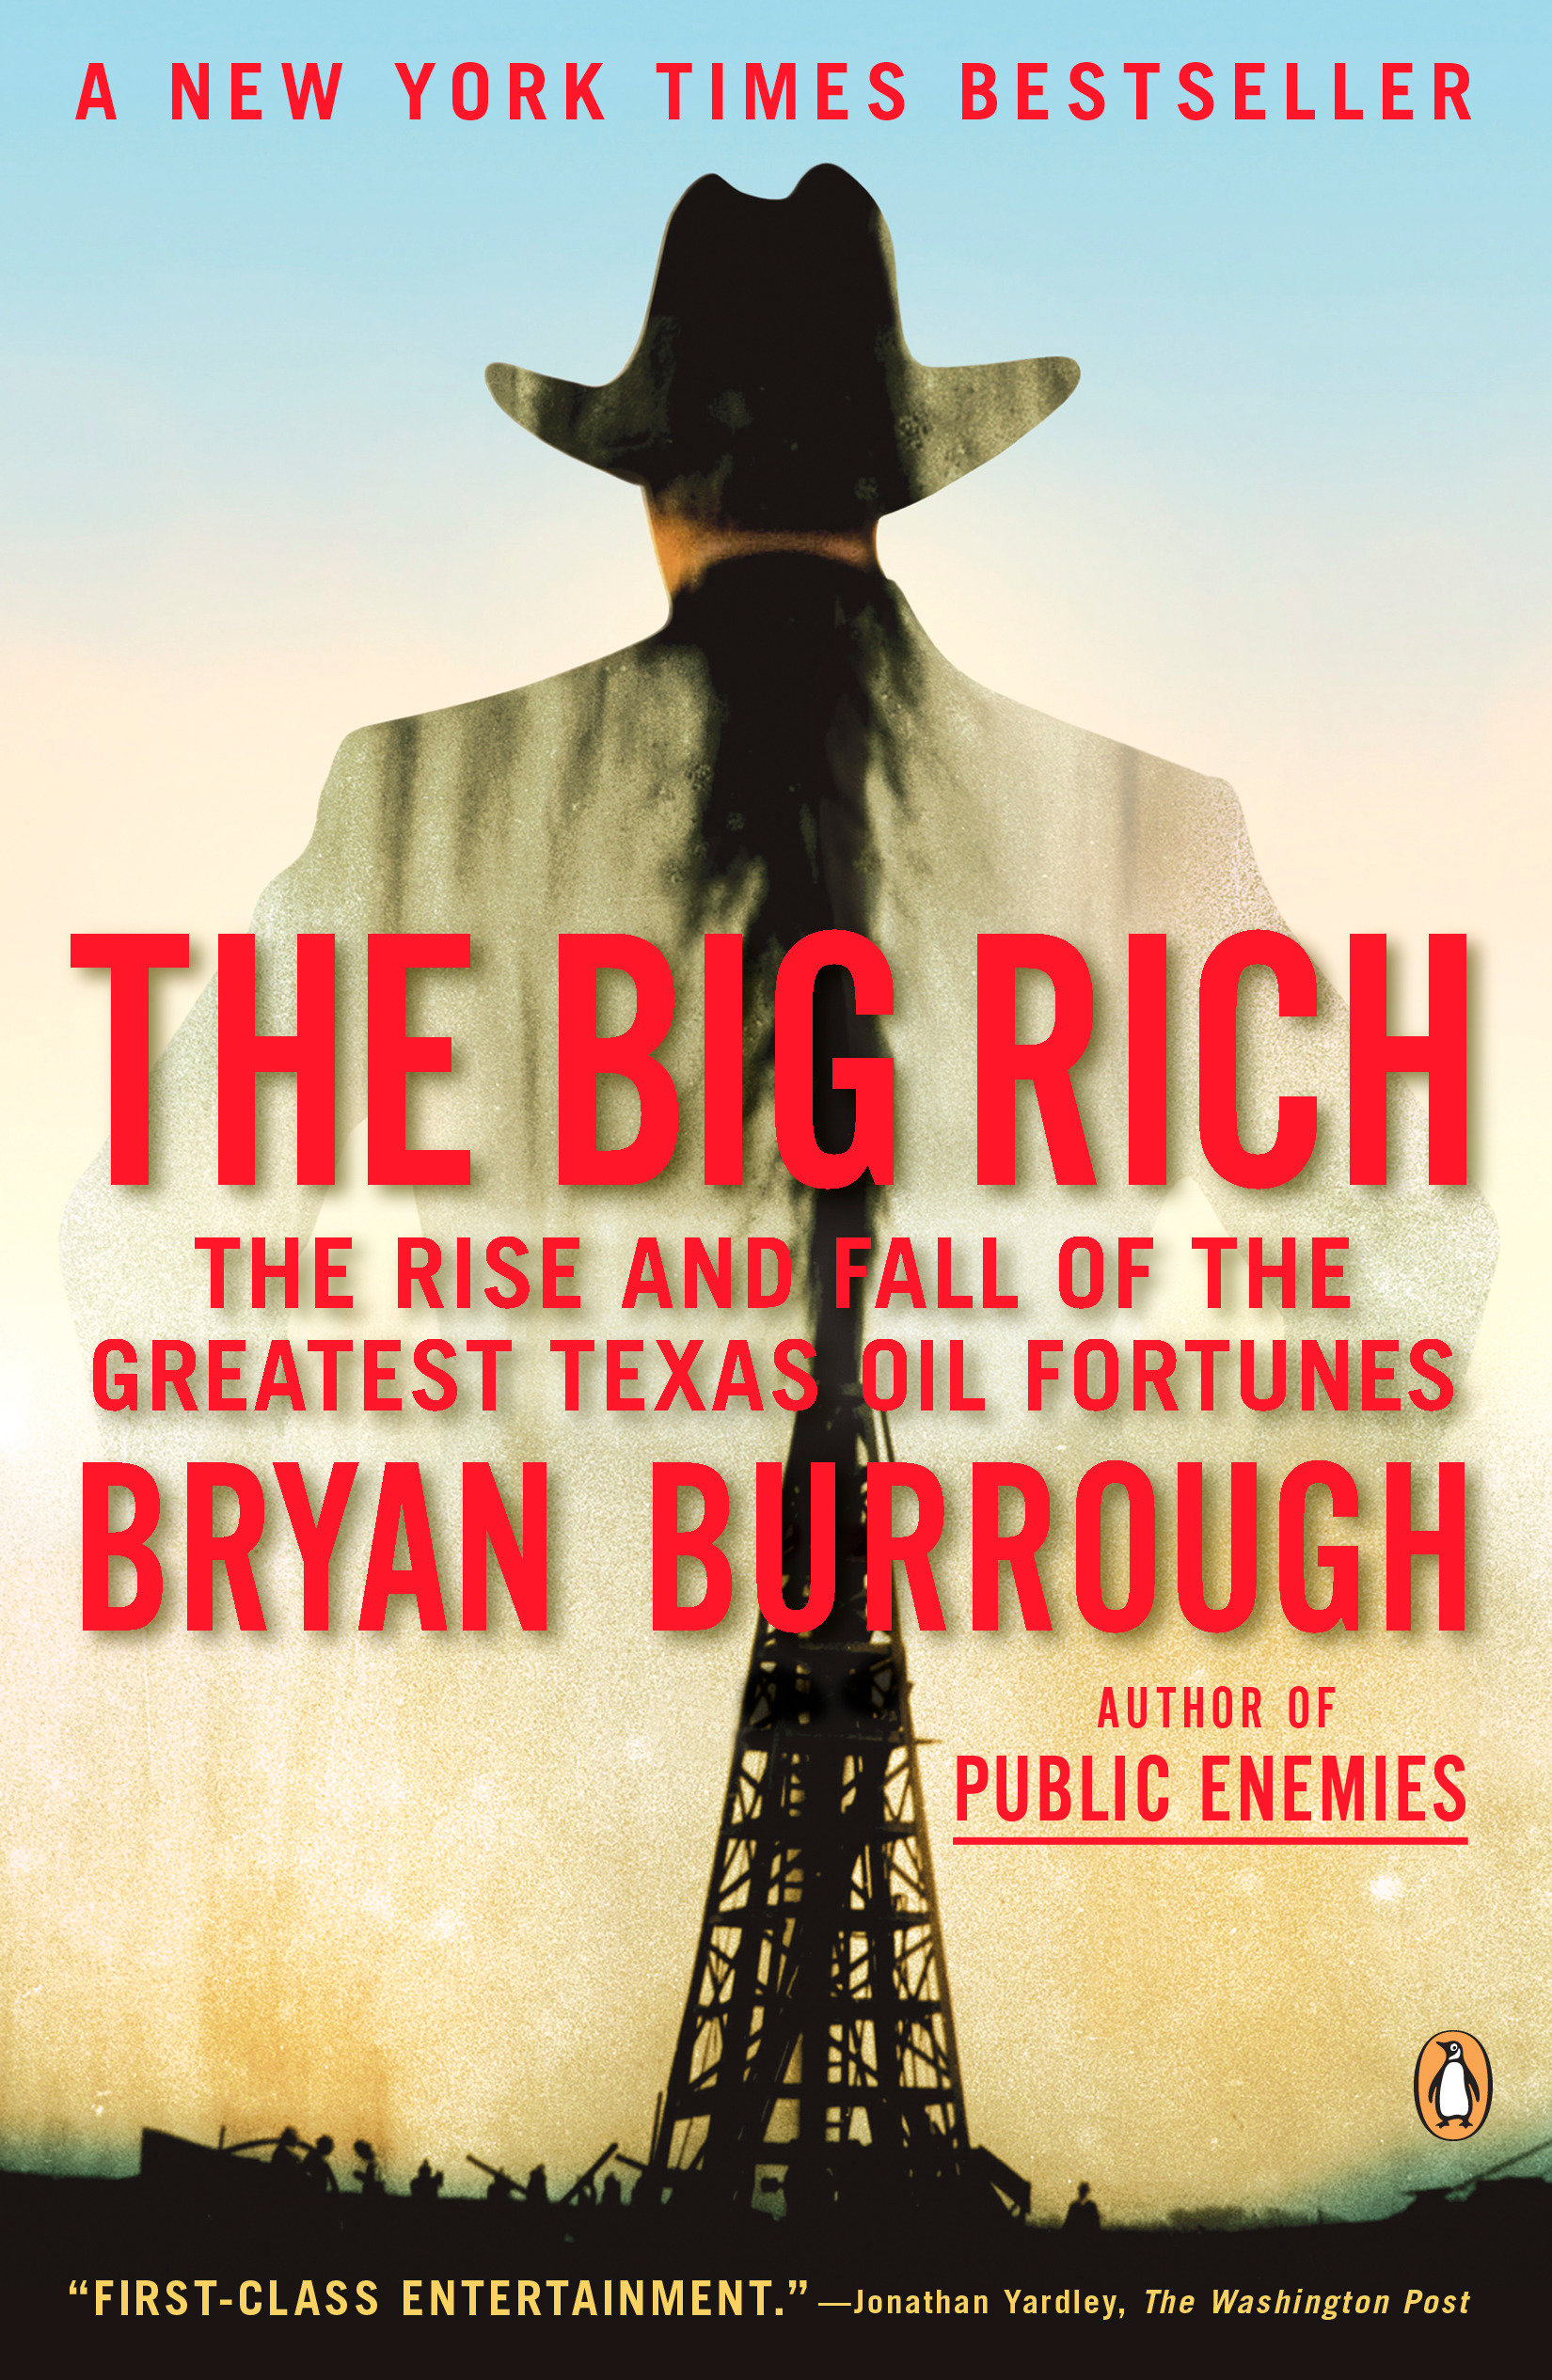 The big rich the rise and fall of the greatest Texas oil fortunes cover image